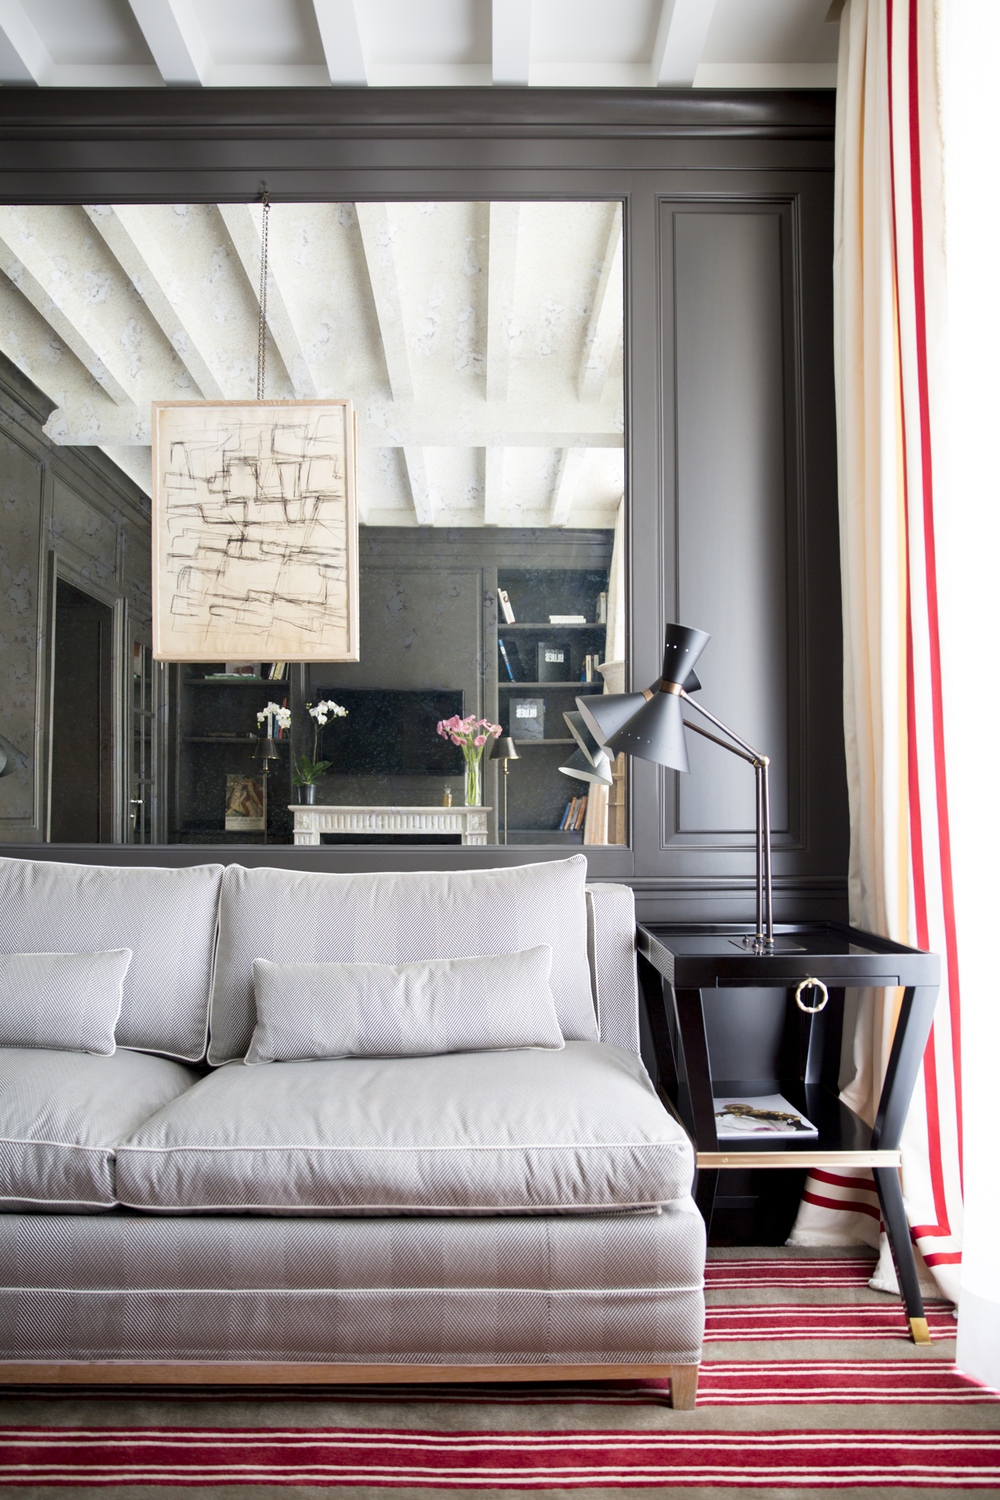 At Home with : Marquis Faubourg Saint-Honoré in Paris